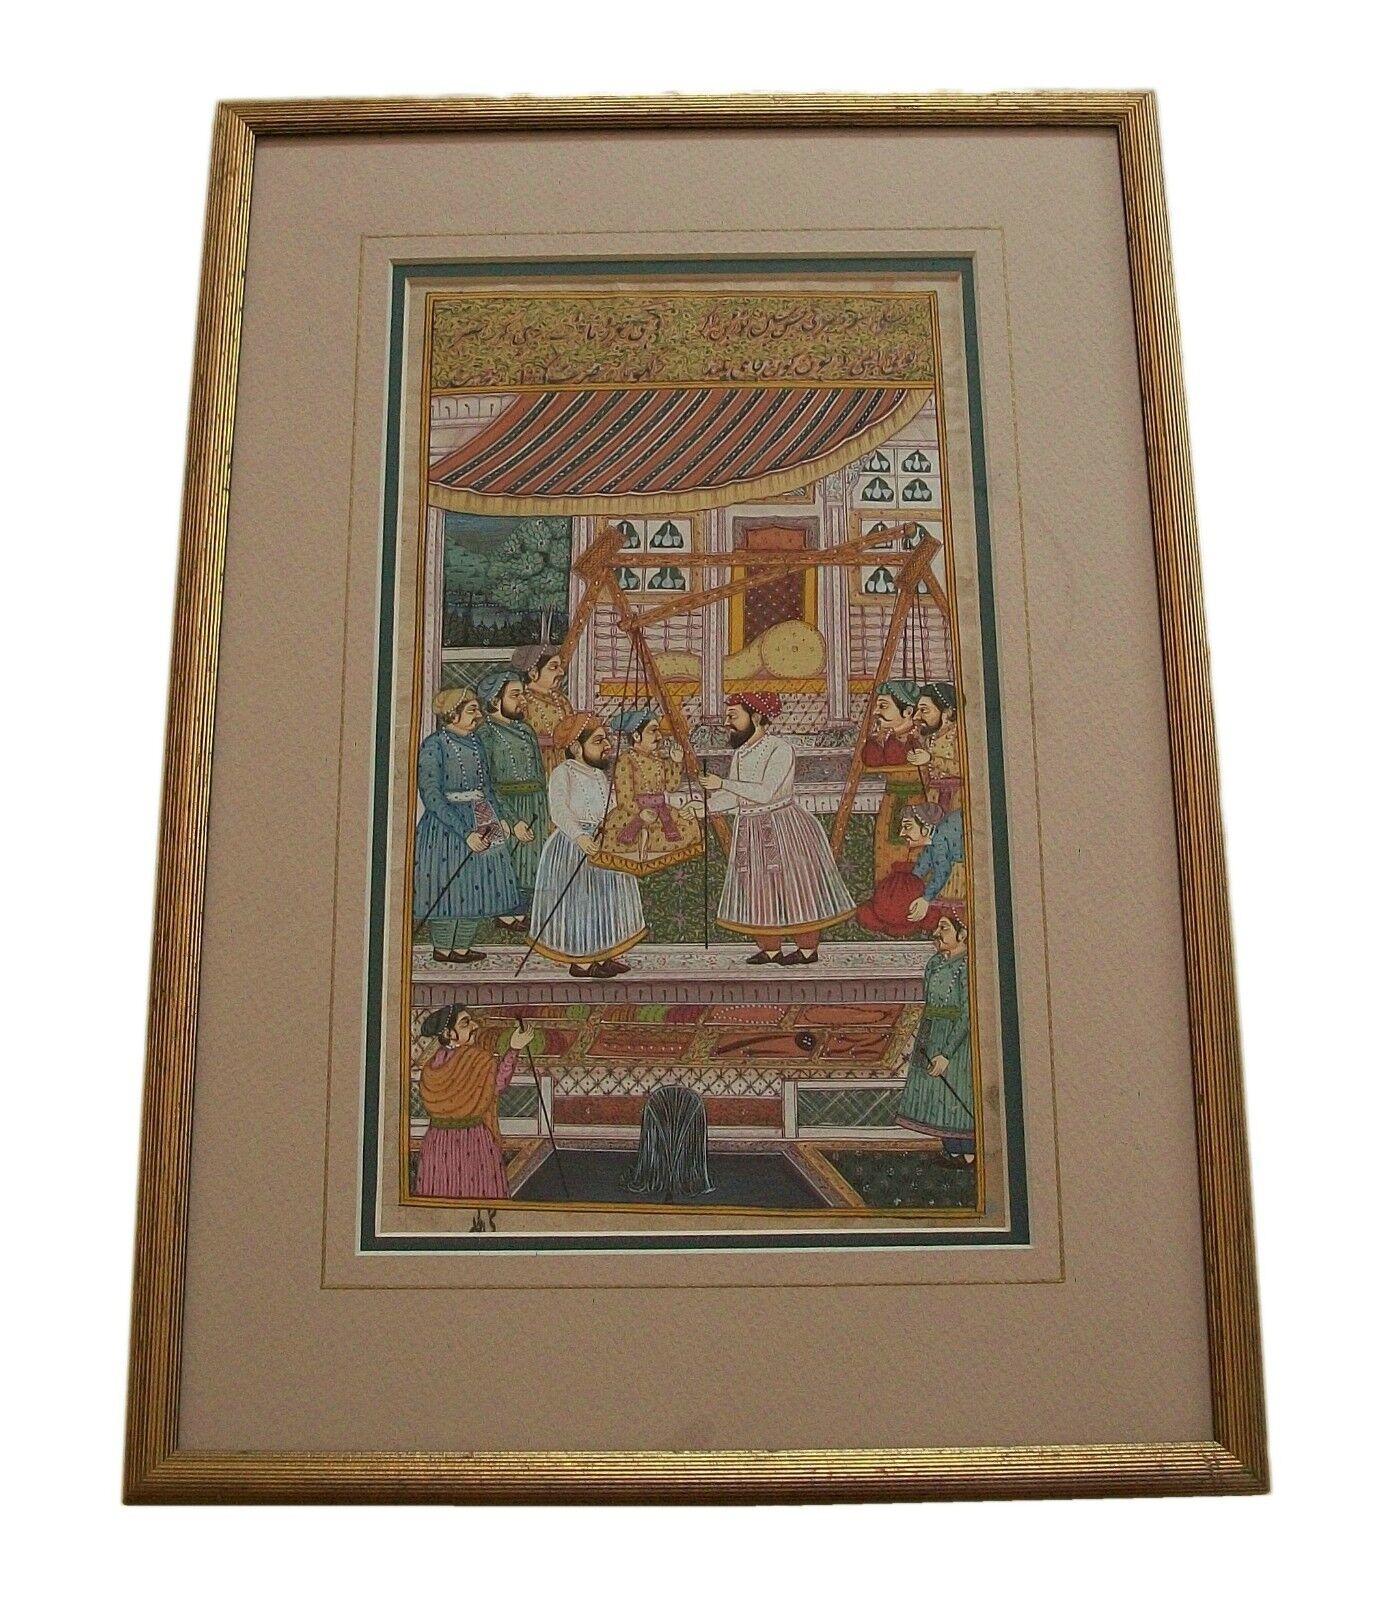 mughal style of painting